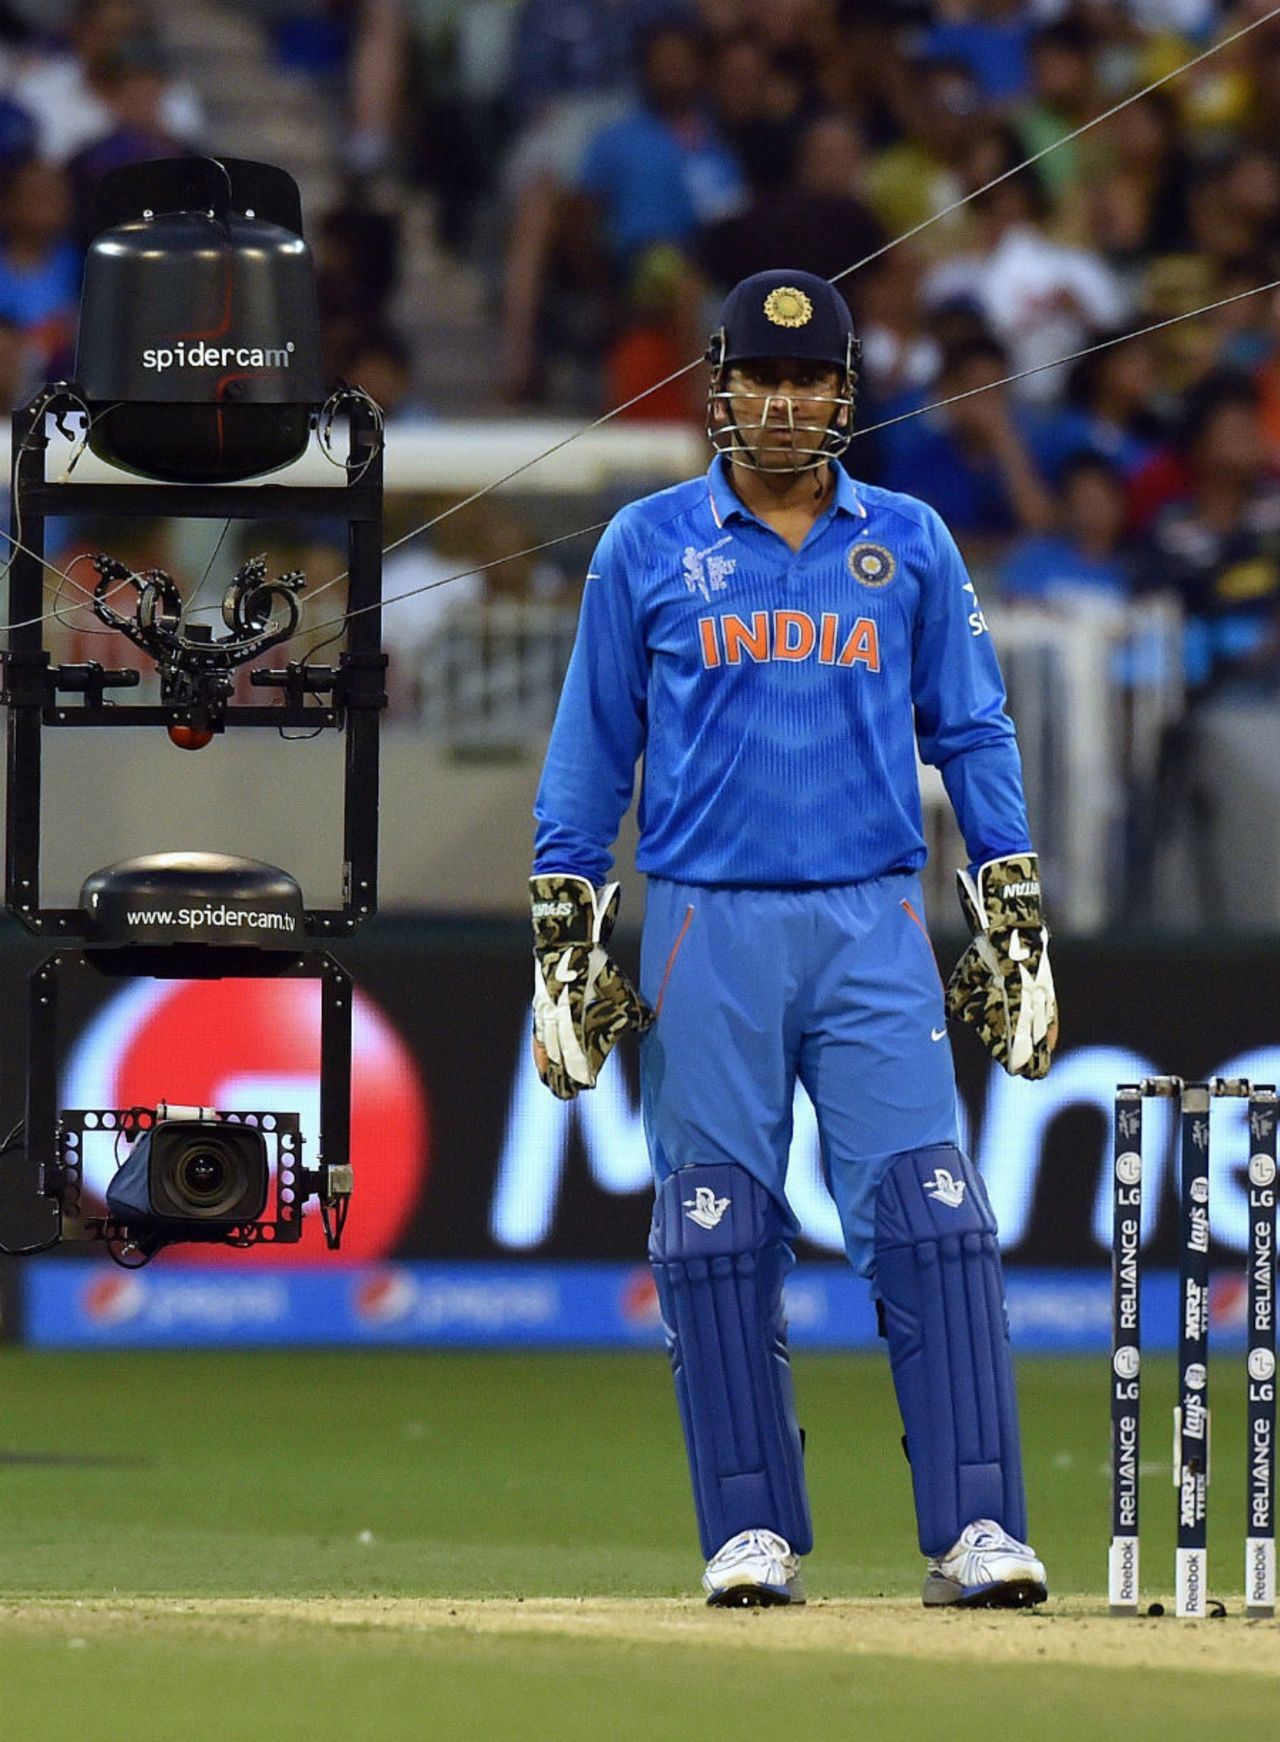 You talking to me? The spider cam catches up with MS Dhoni, India v South Africa, World Cup 2015, Group B, Melbourne, February 22, 2015